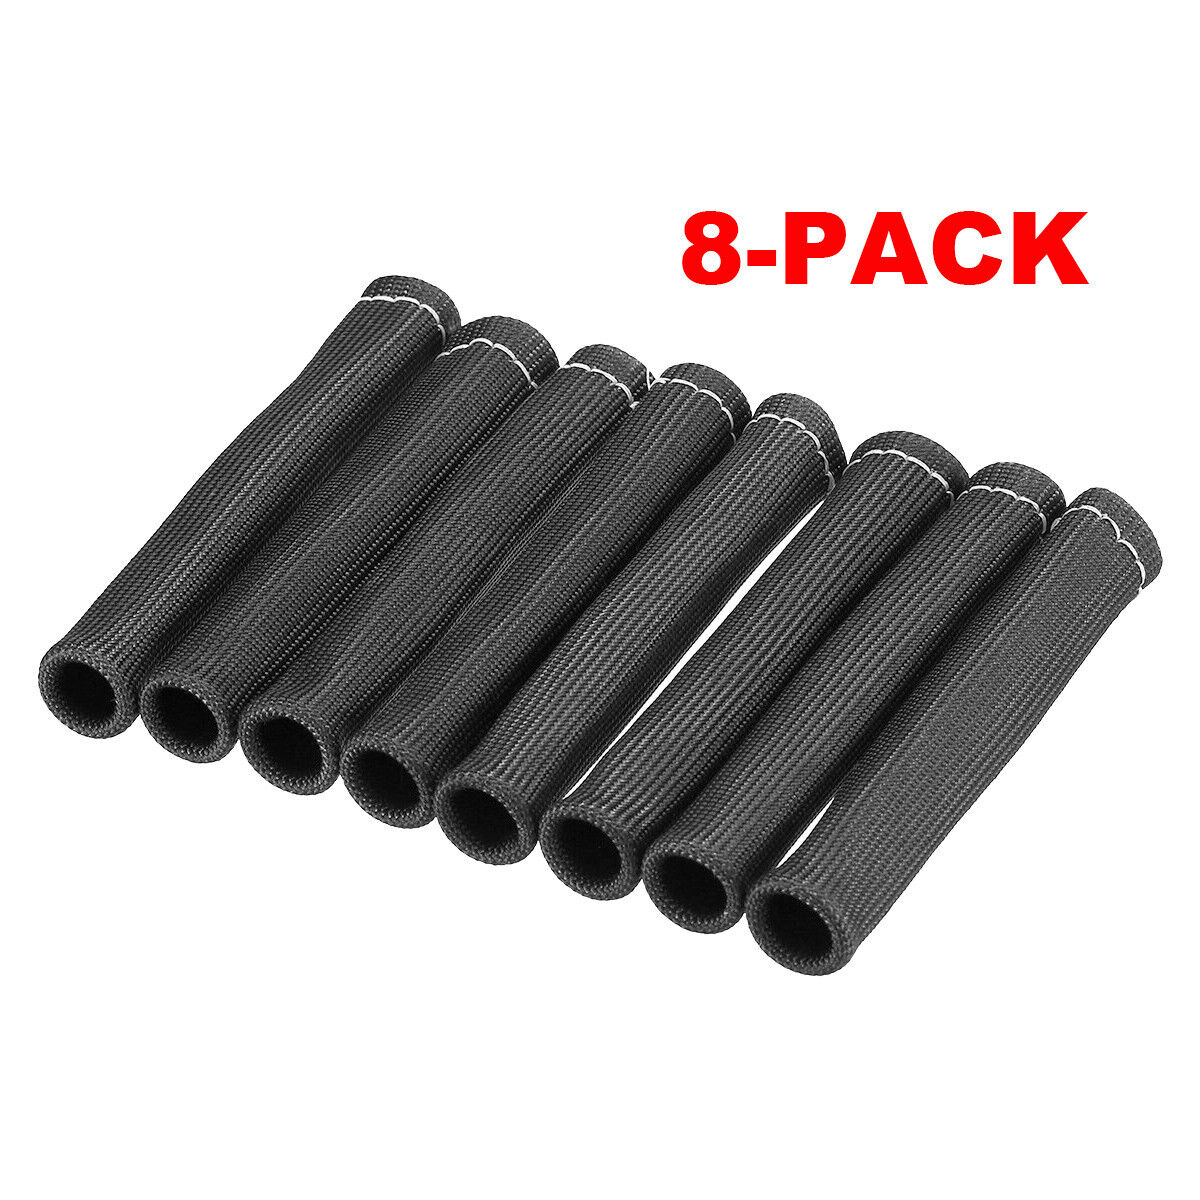 8PCS 2500° Spark Plug Wire Boots Protectors Sleeve Heat Shield Cover For SBC BBC Unbranded